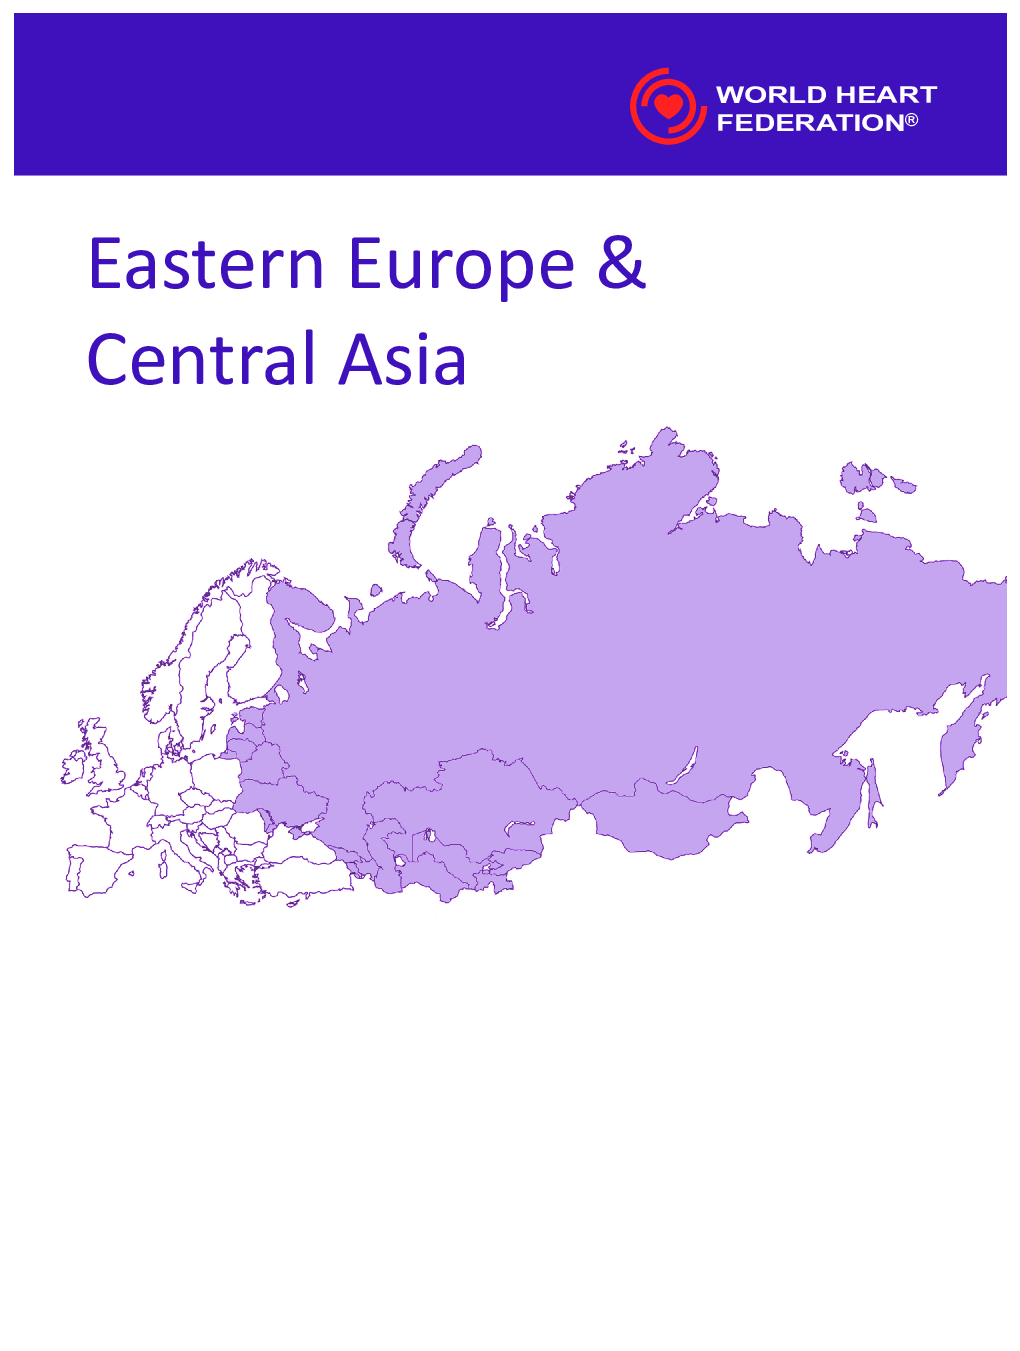 Eastern Europe & Central Asia